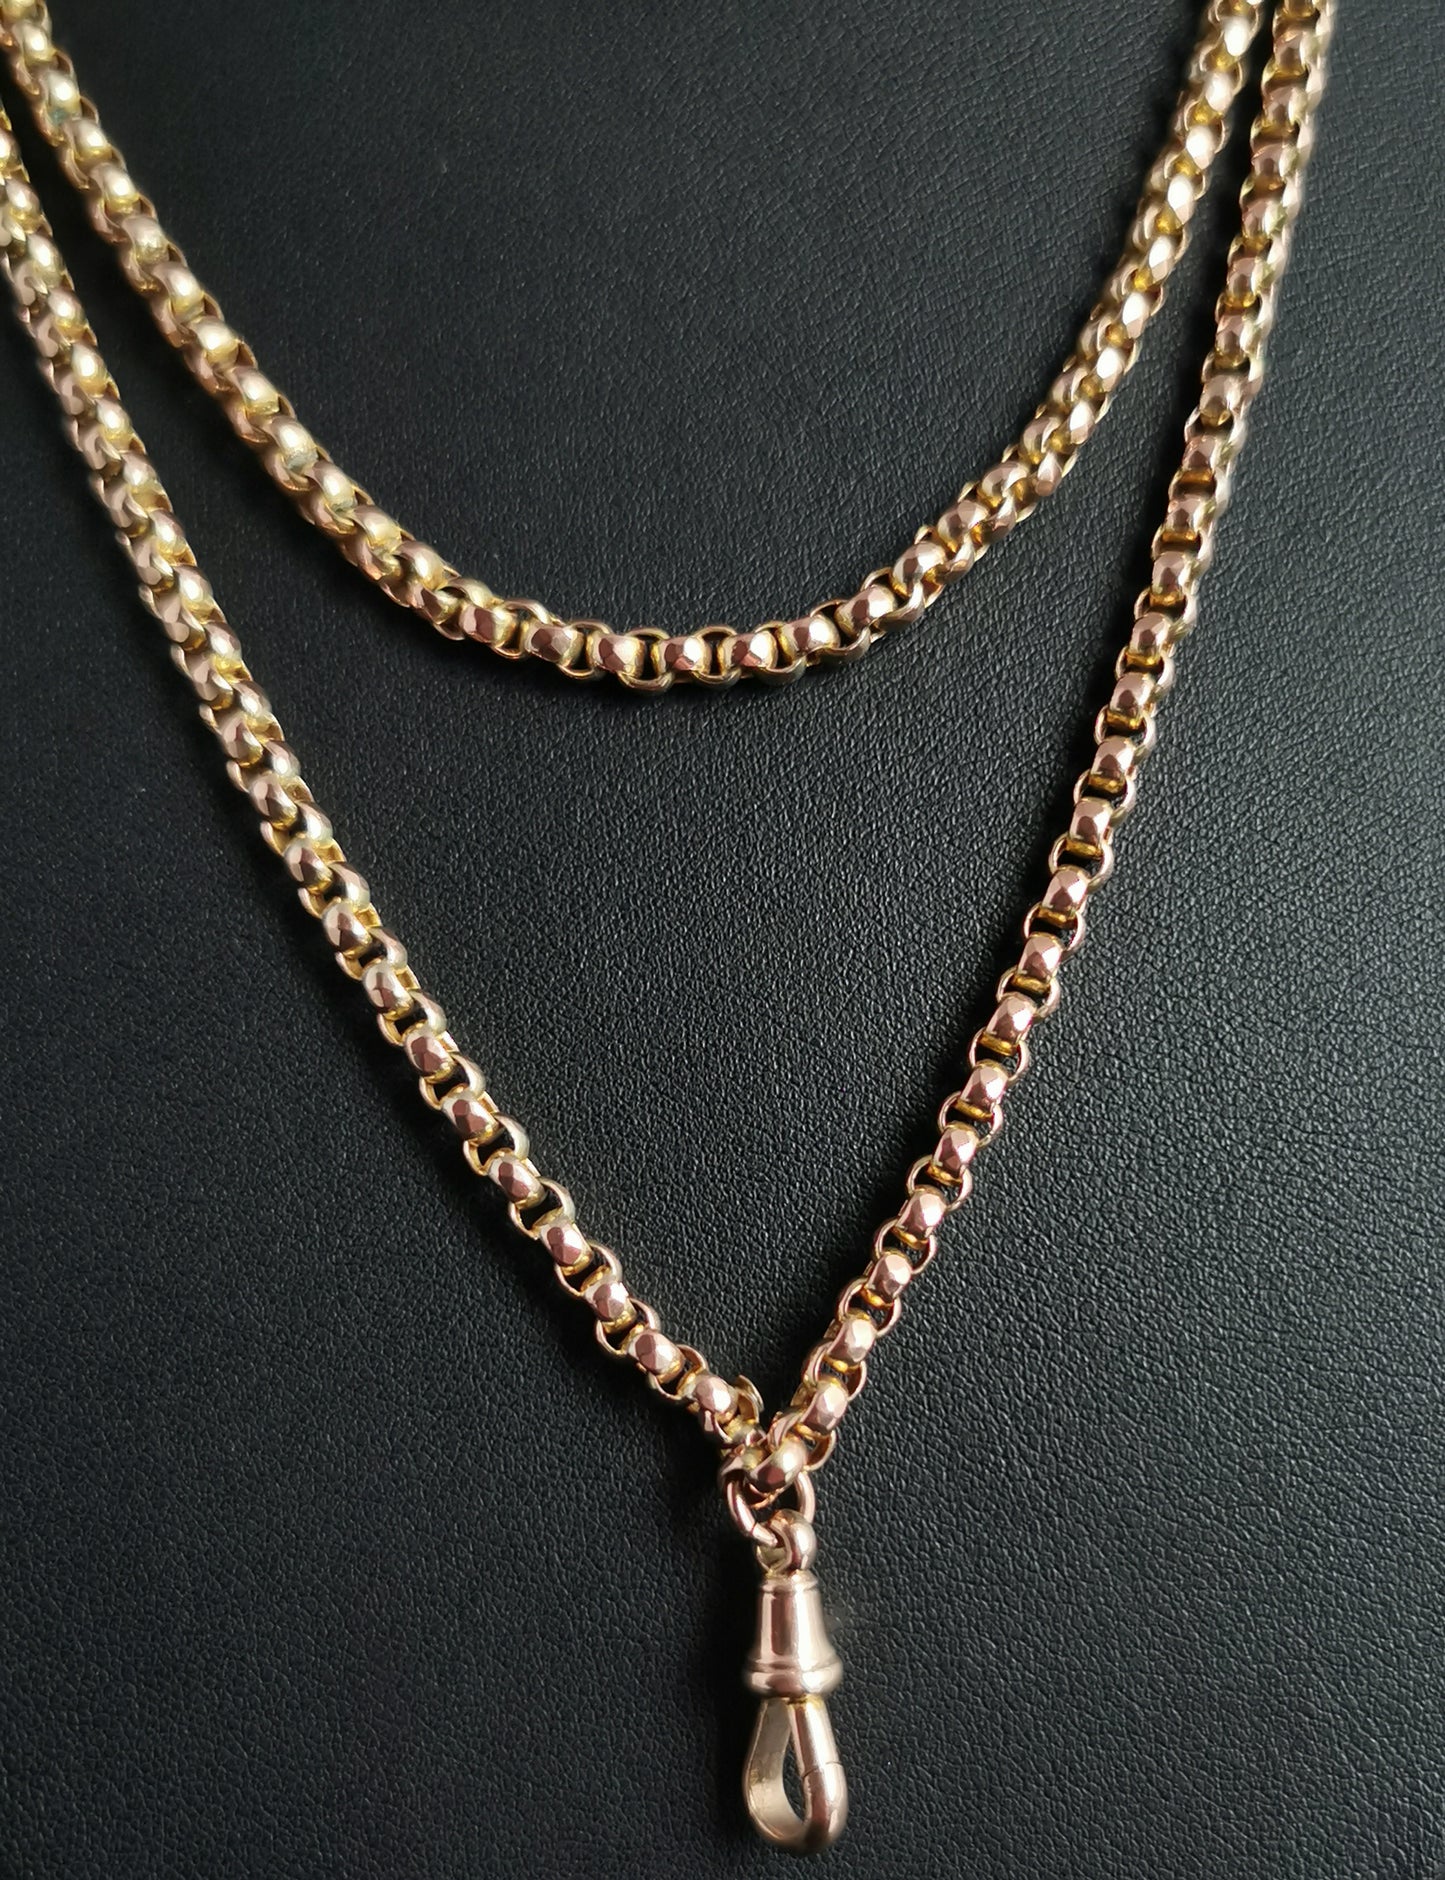 Antique 9ct gold long chain, longuard l, muff chain necklace, Victorian